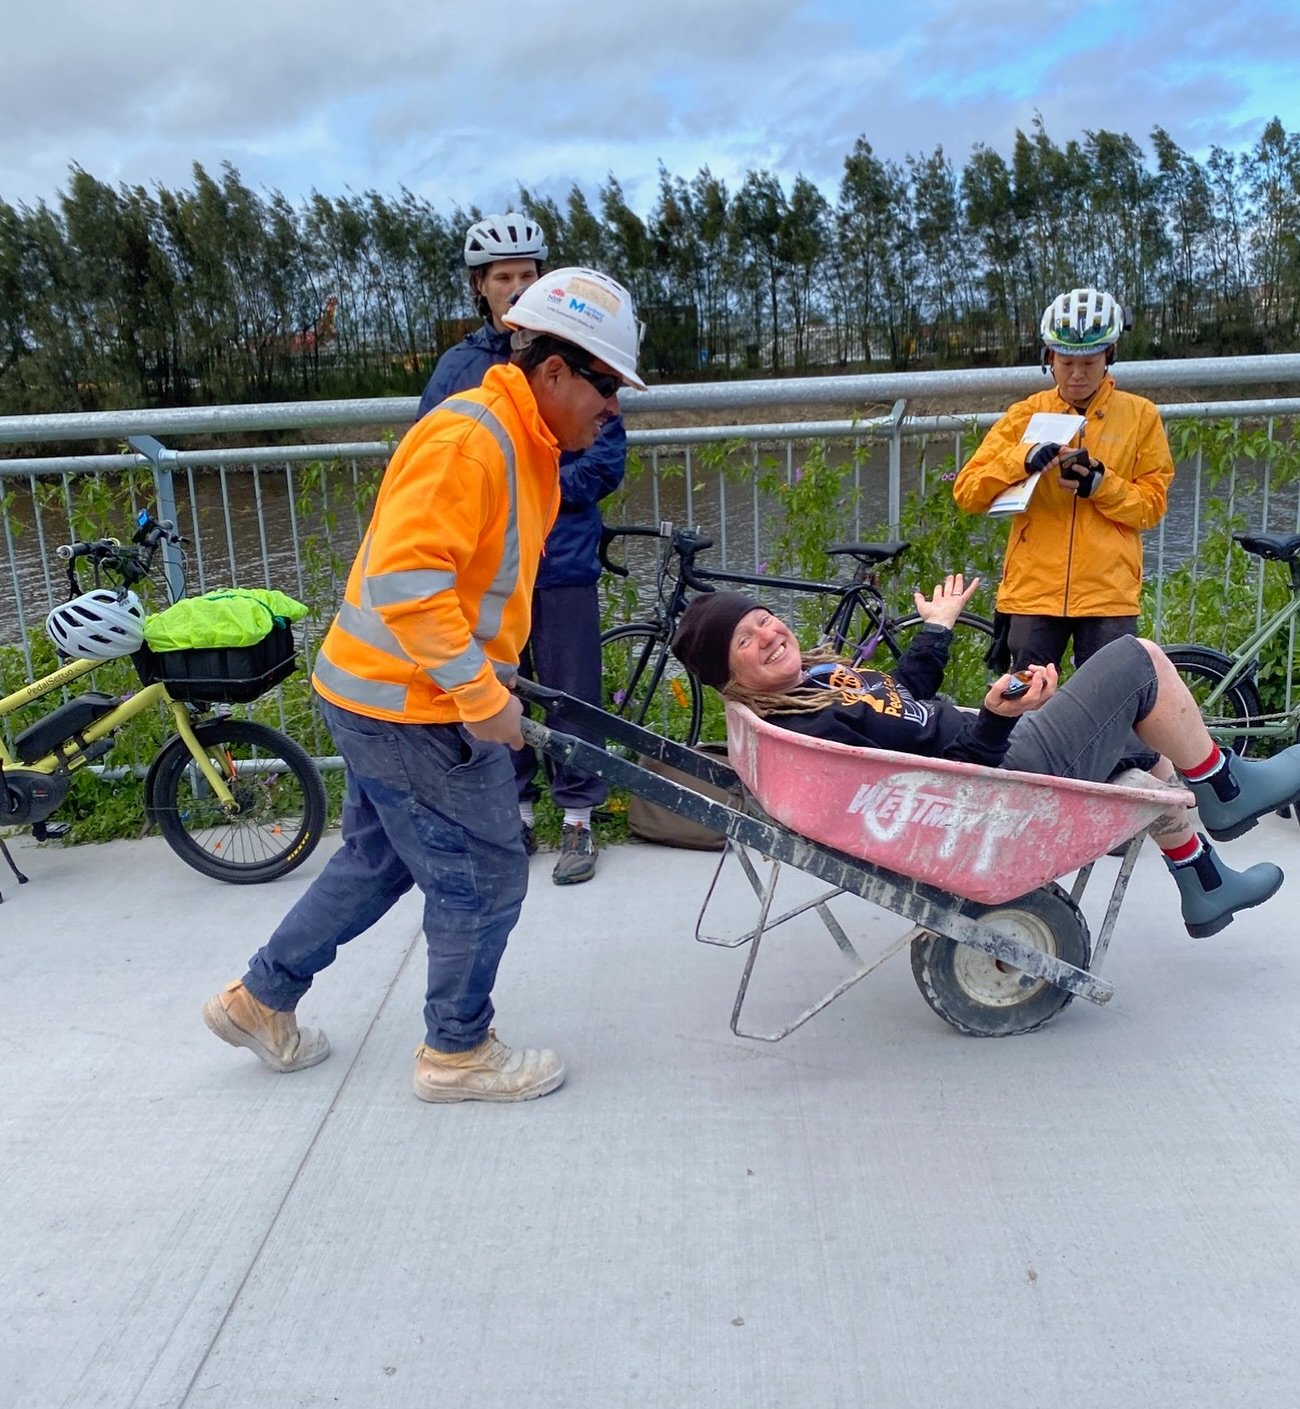 Thanks @cooks_river_alliance for capturing a moment and a peep inside our Guided Rides. Pedal Set Go encourages all forms of micro mobility, especially when it means making new friends and connecting to community. #sydneygateway